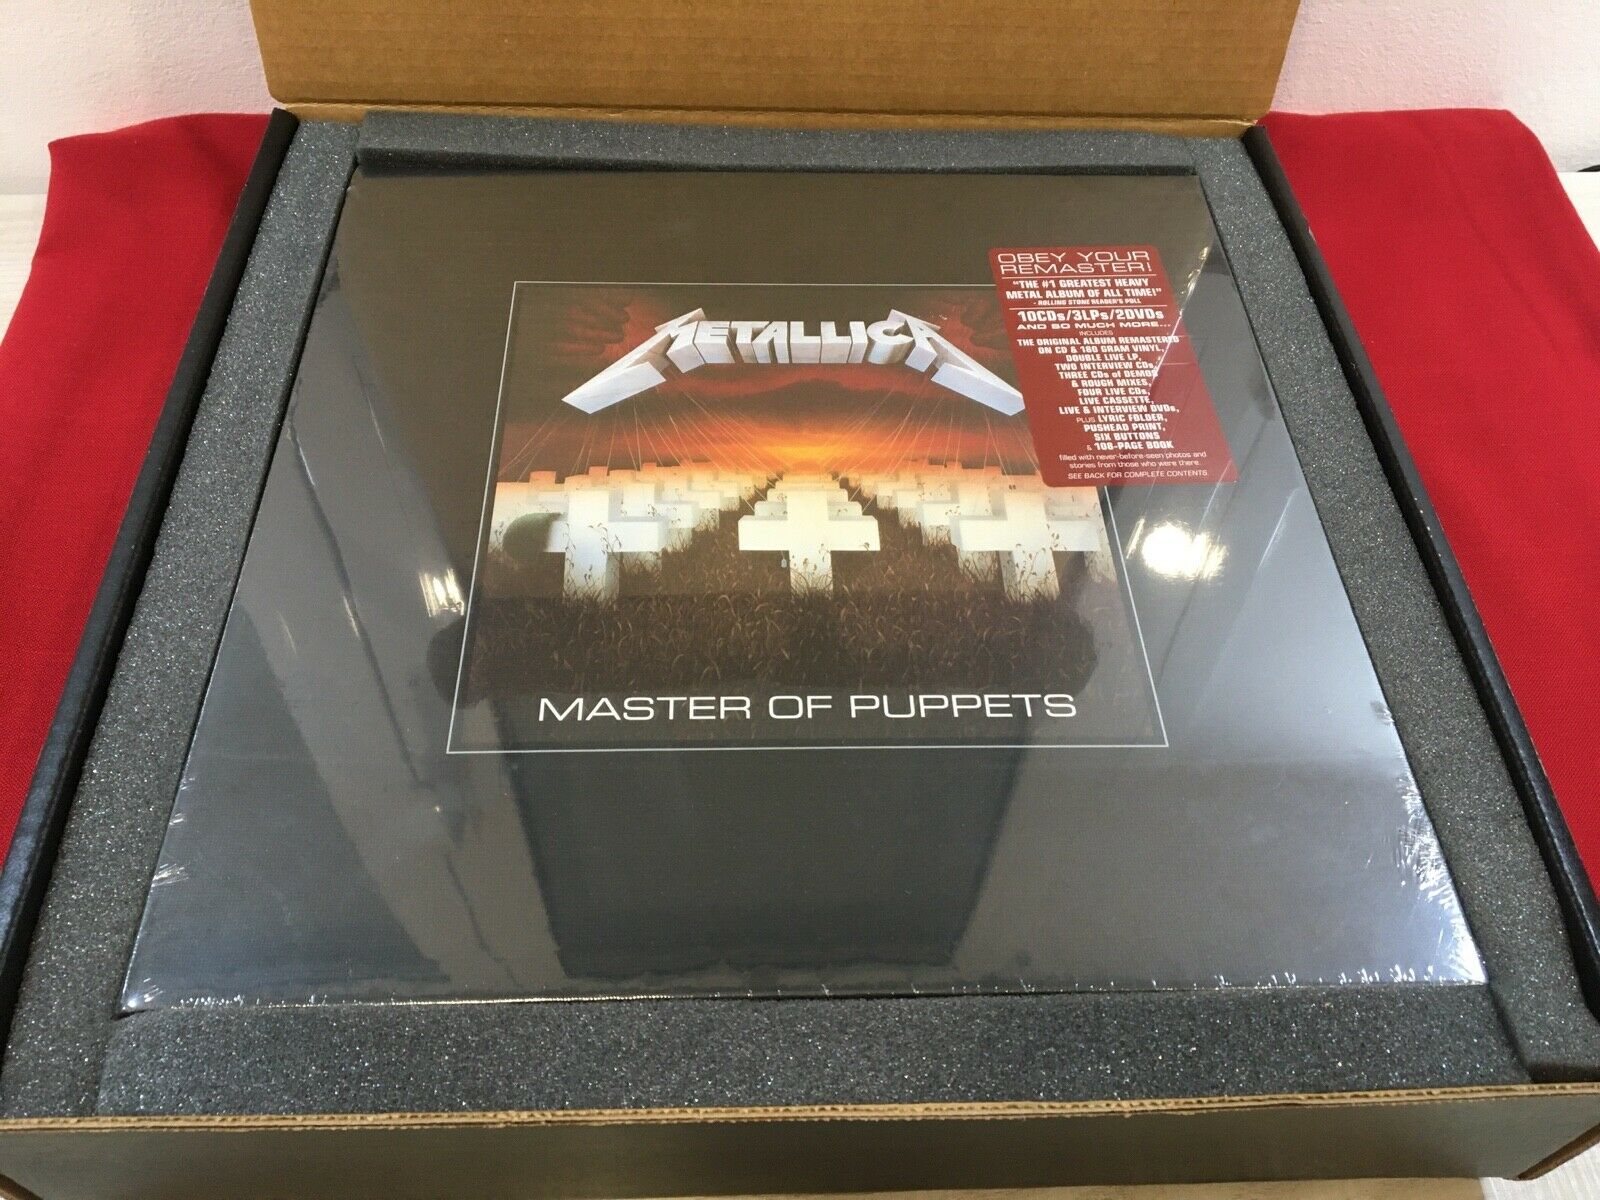 Metallica - Master Of Puppets (remastered) - CD